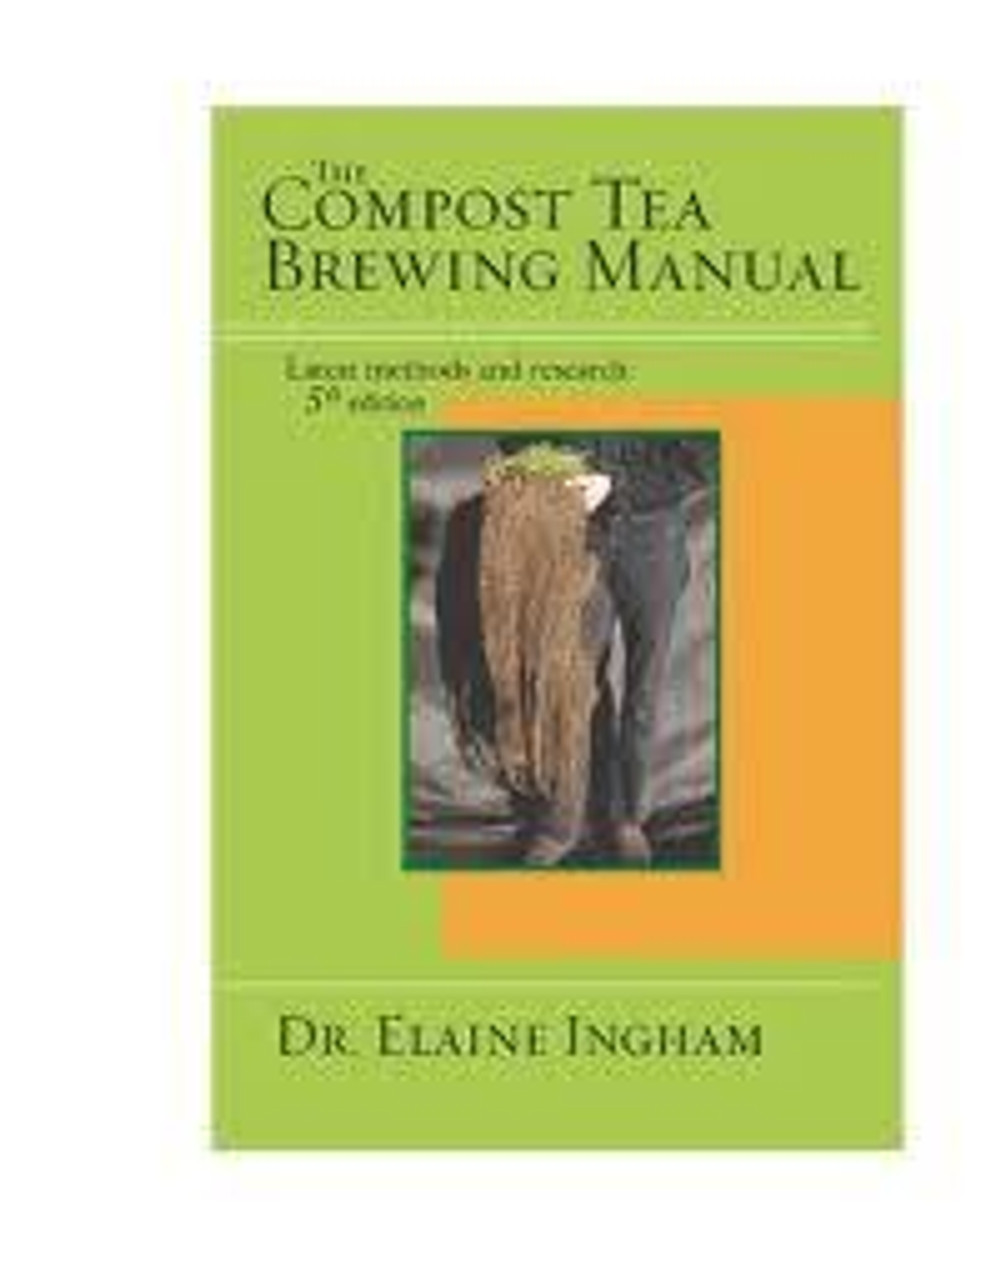 Compost tea brewing manual 5th edition by Dr. Elaine Ingham